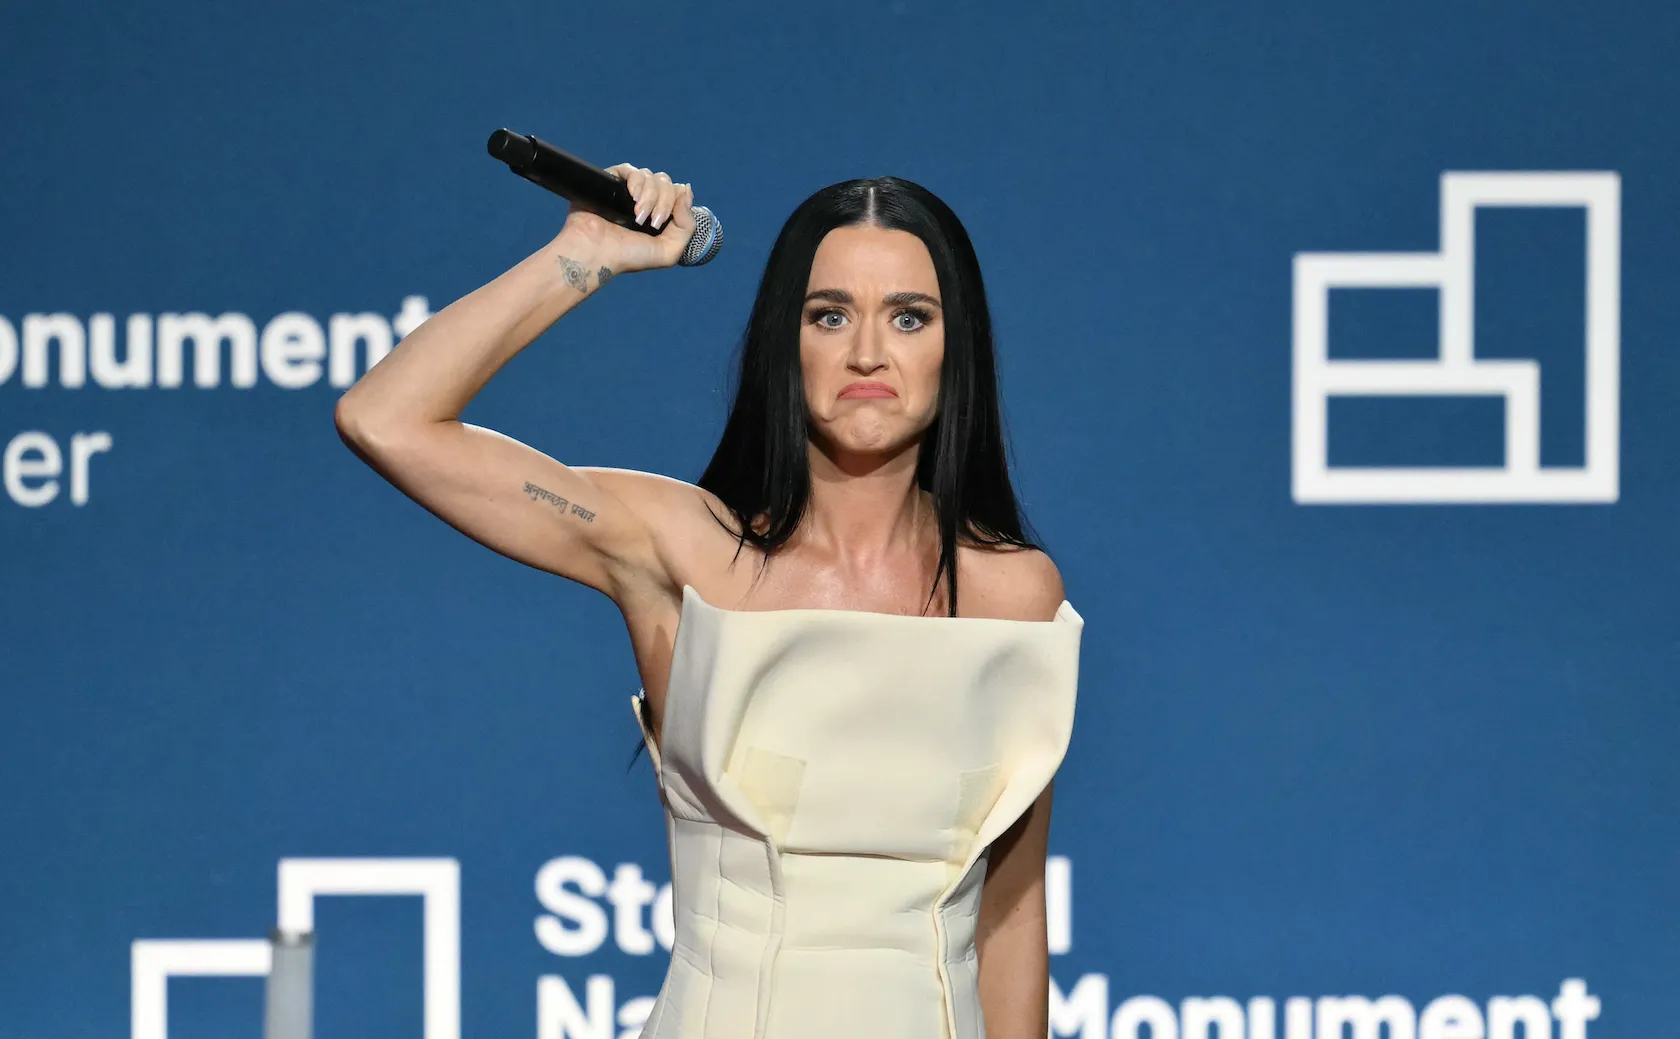 Katy Perry holding her arm up with a microphone while wearing a white strapless dress at an event